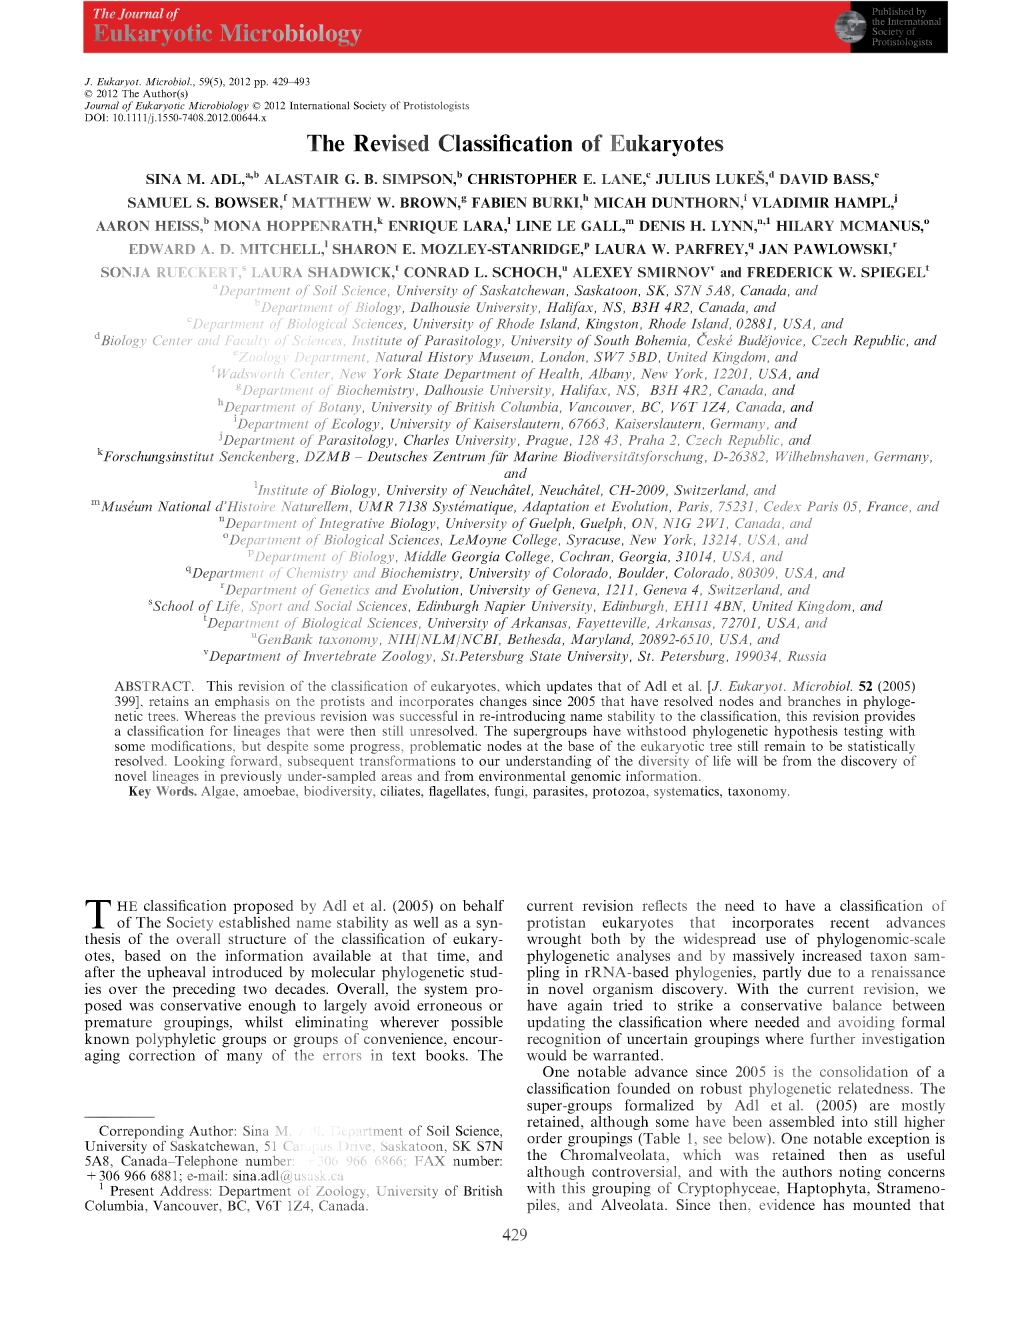 The Revised Classification of Eukaryotes